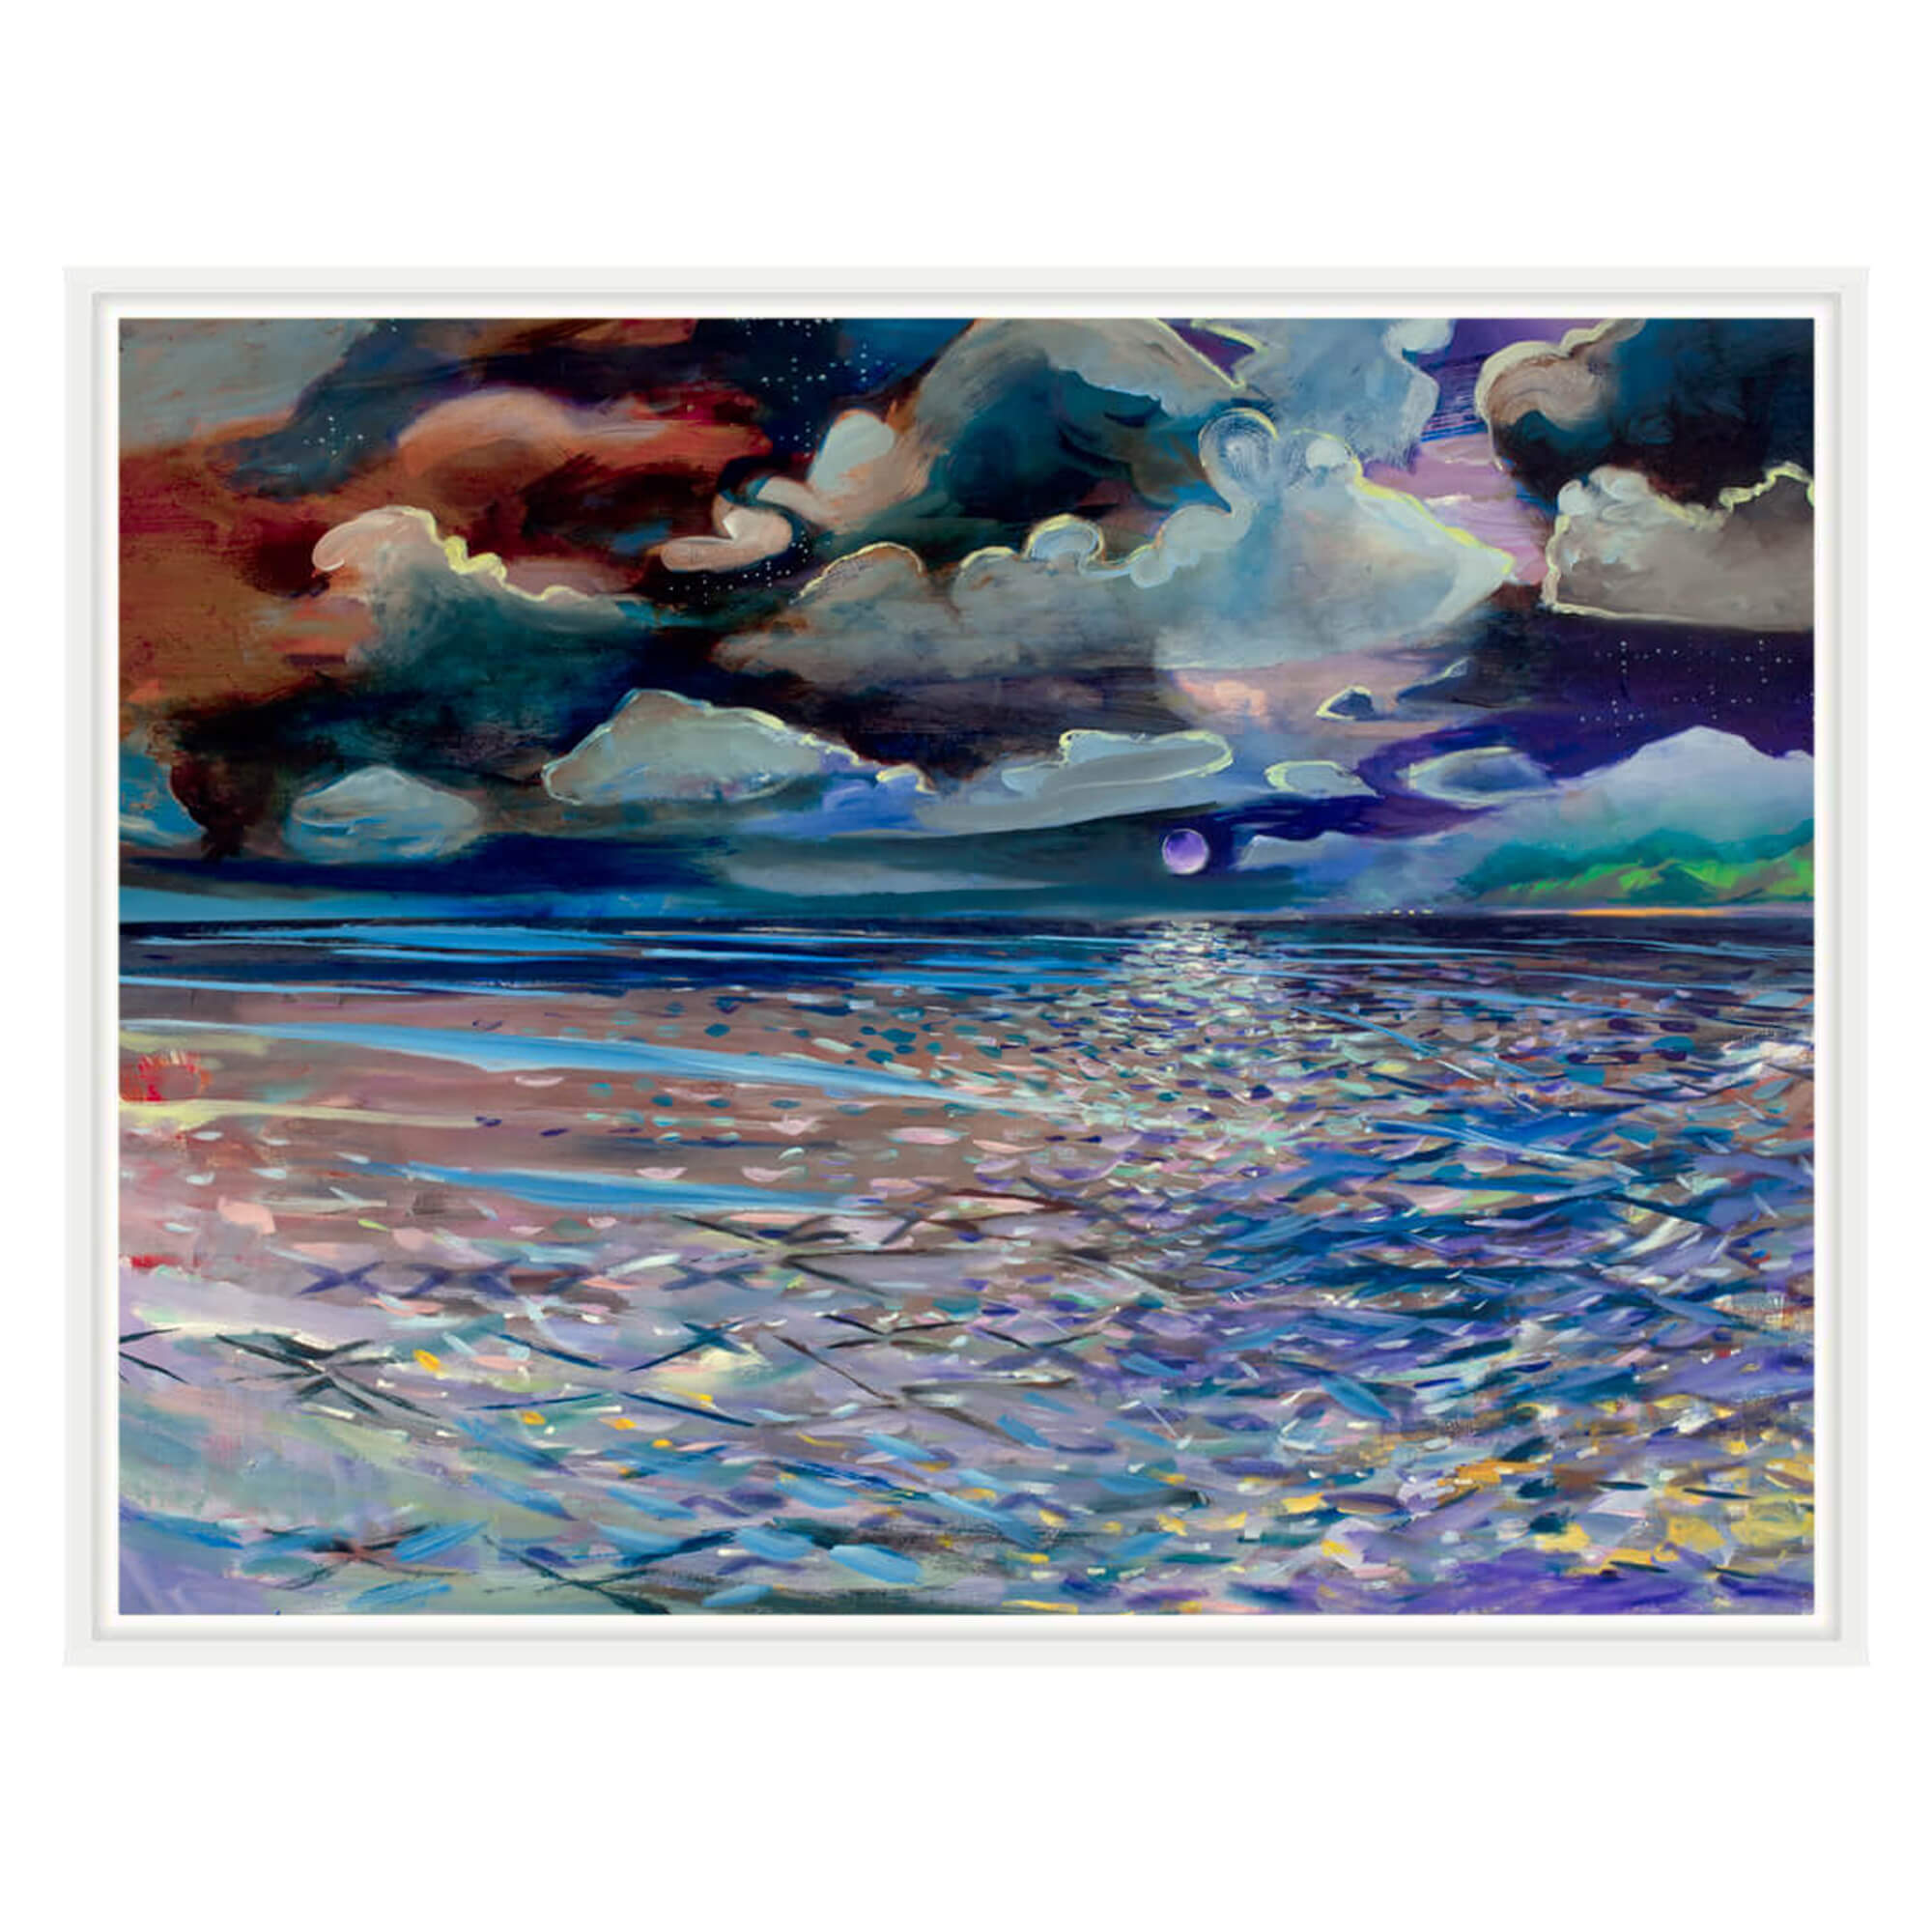 Framed canvas art print of an abstract artwork depicting a full moon and a colorful seascape by Hawaii artist Saumolia Puapuaga 